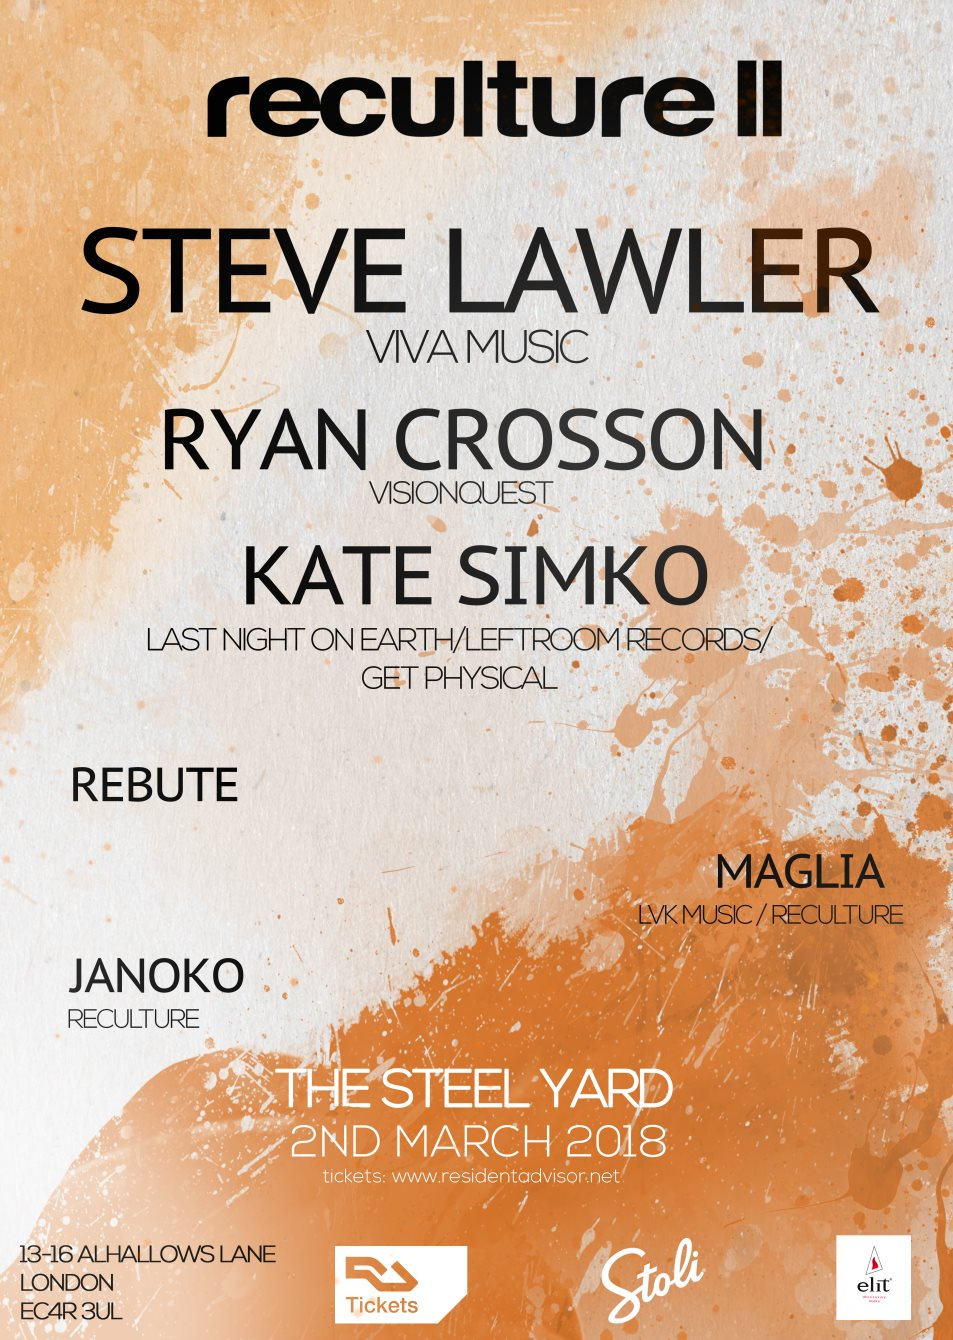 Reculture II with Steve Lawler, Ryan Crosson & Kate Simko - Flyer back